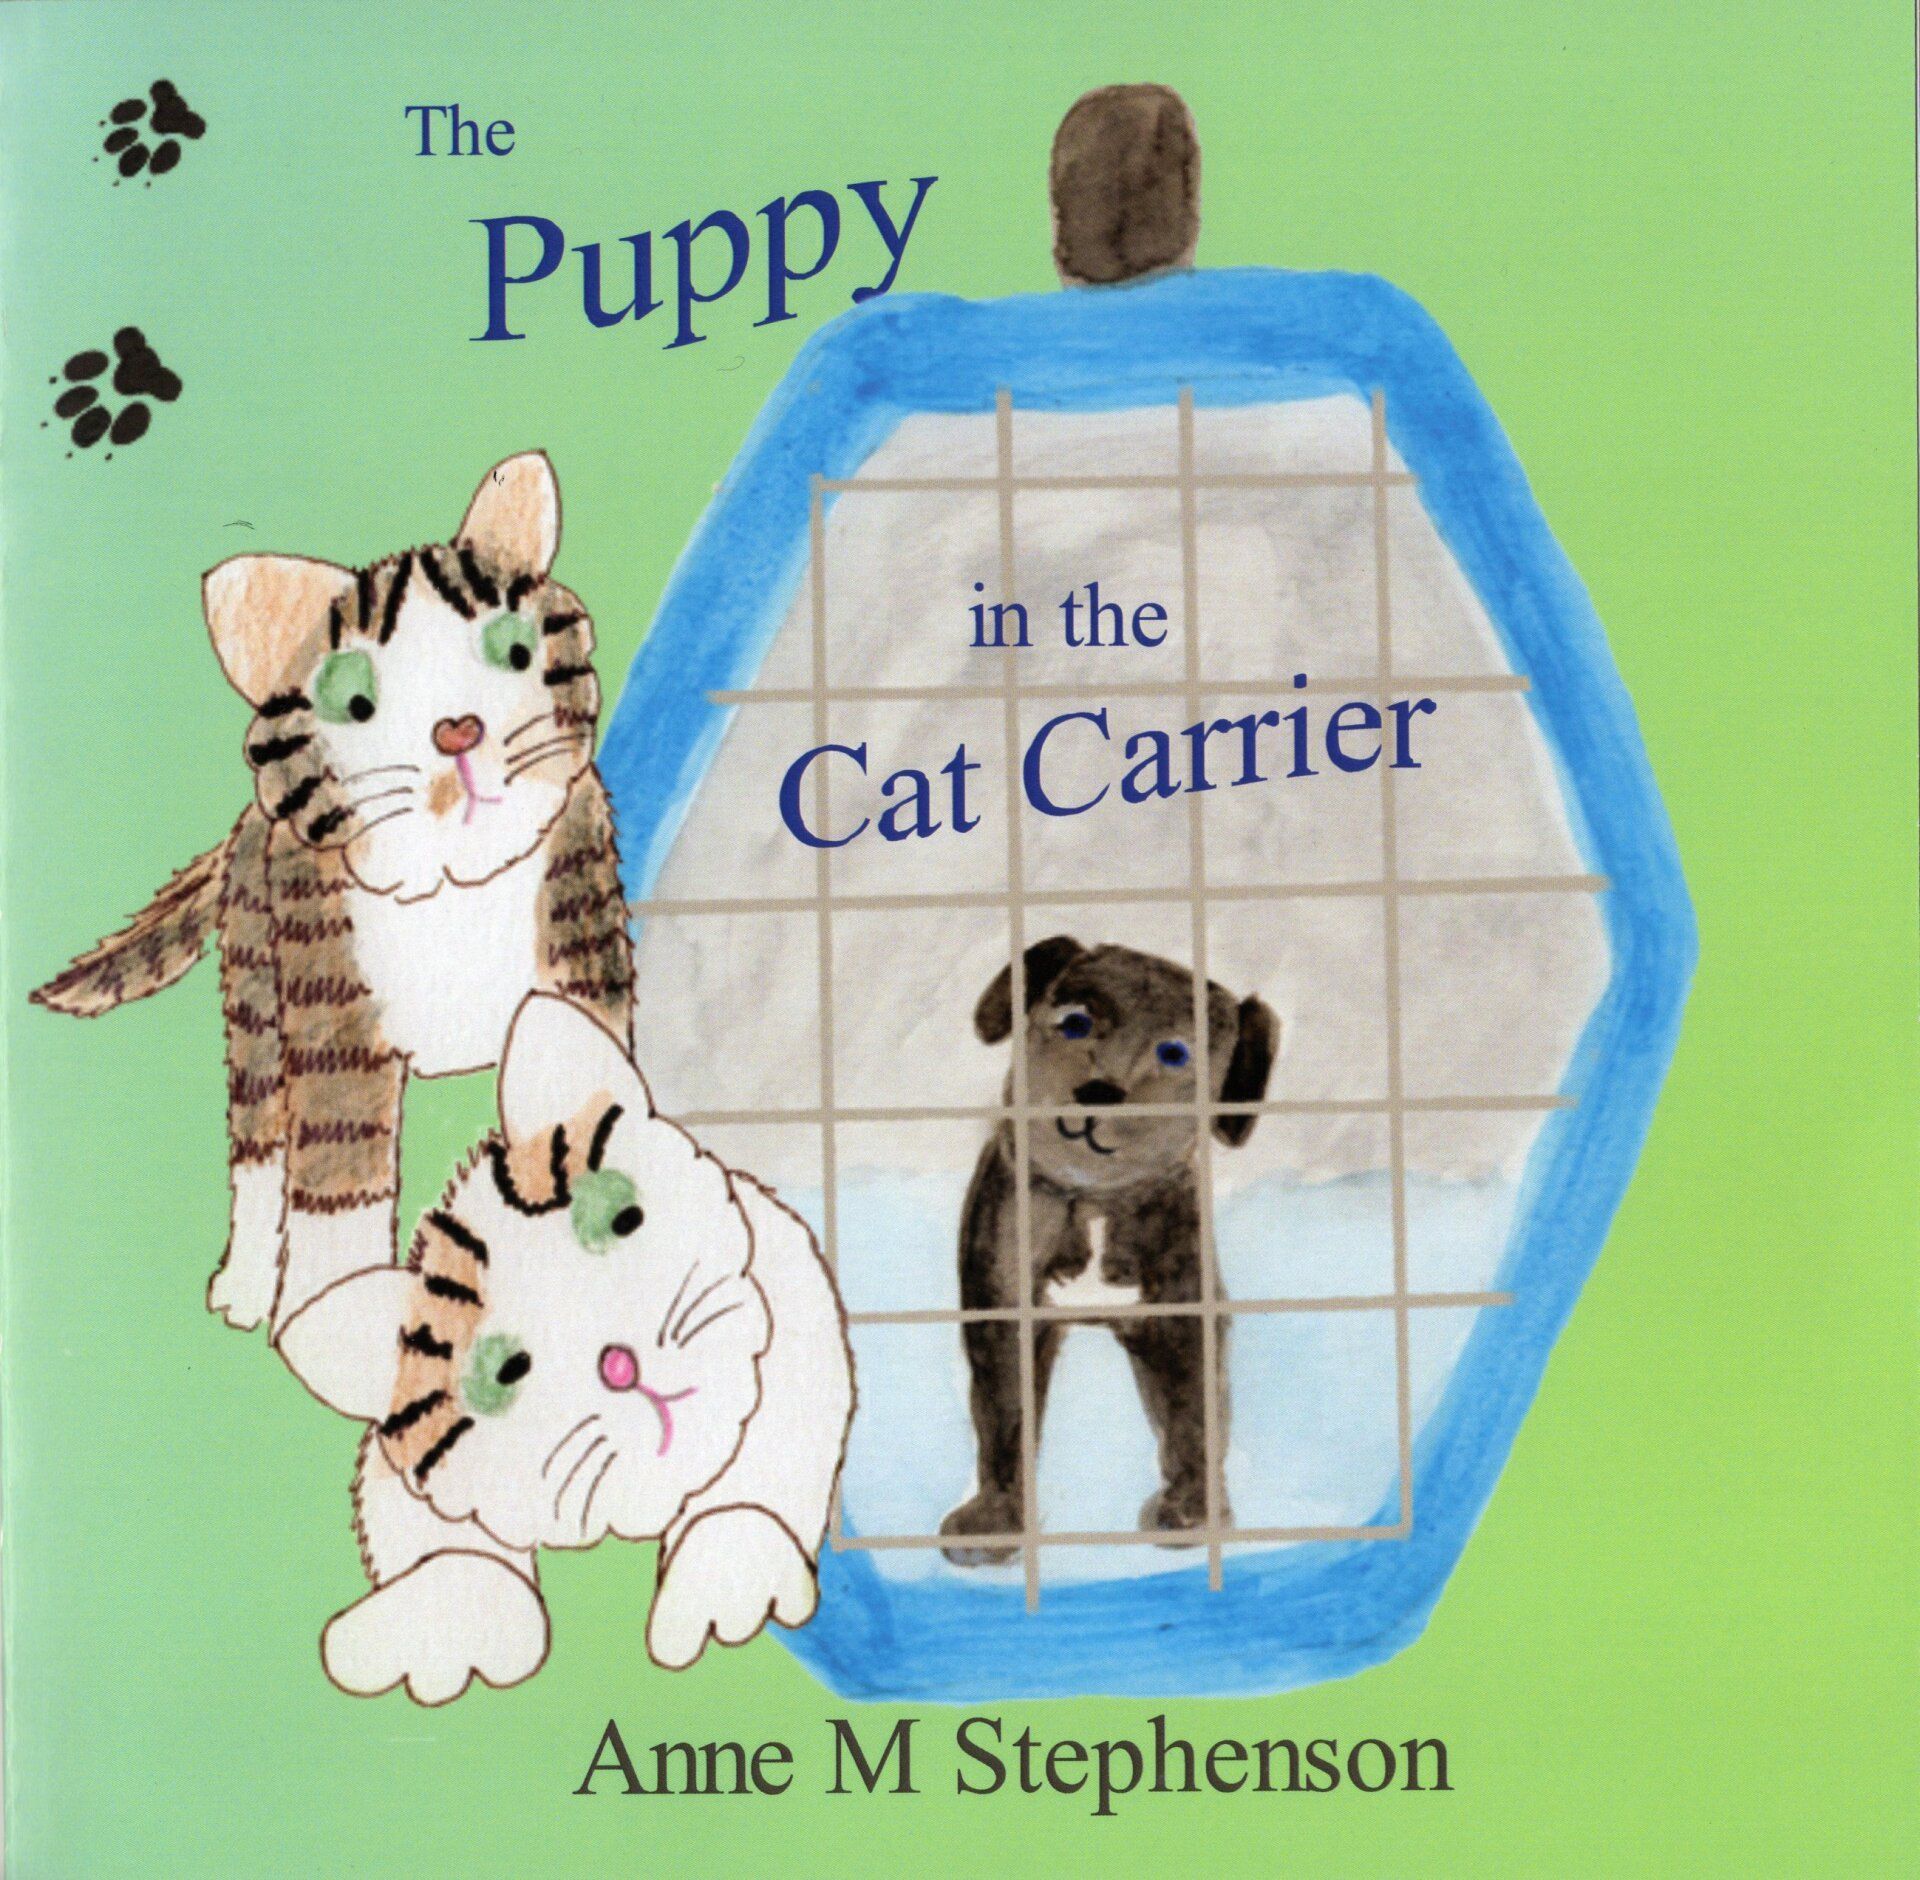 The Puppy in the Cat Carrier book cover image